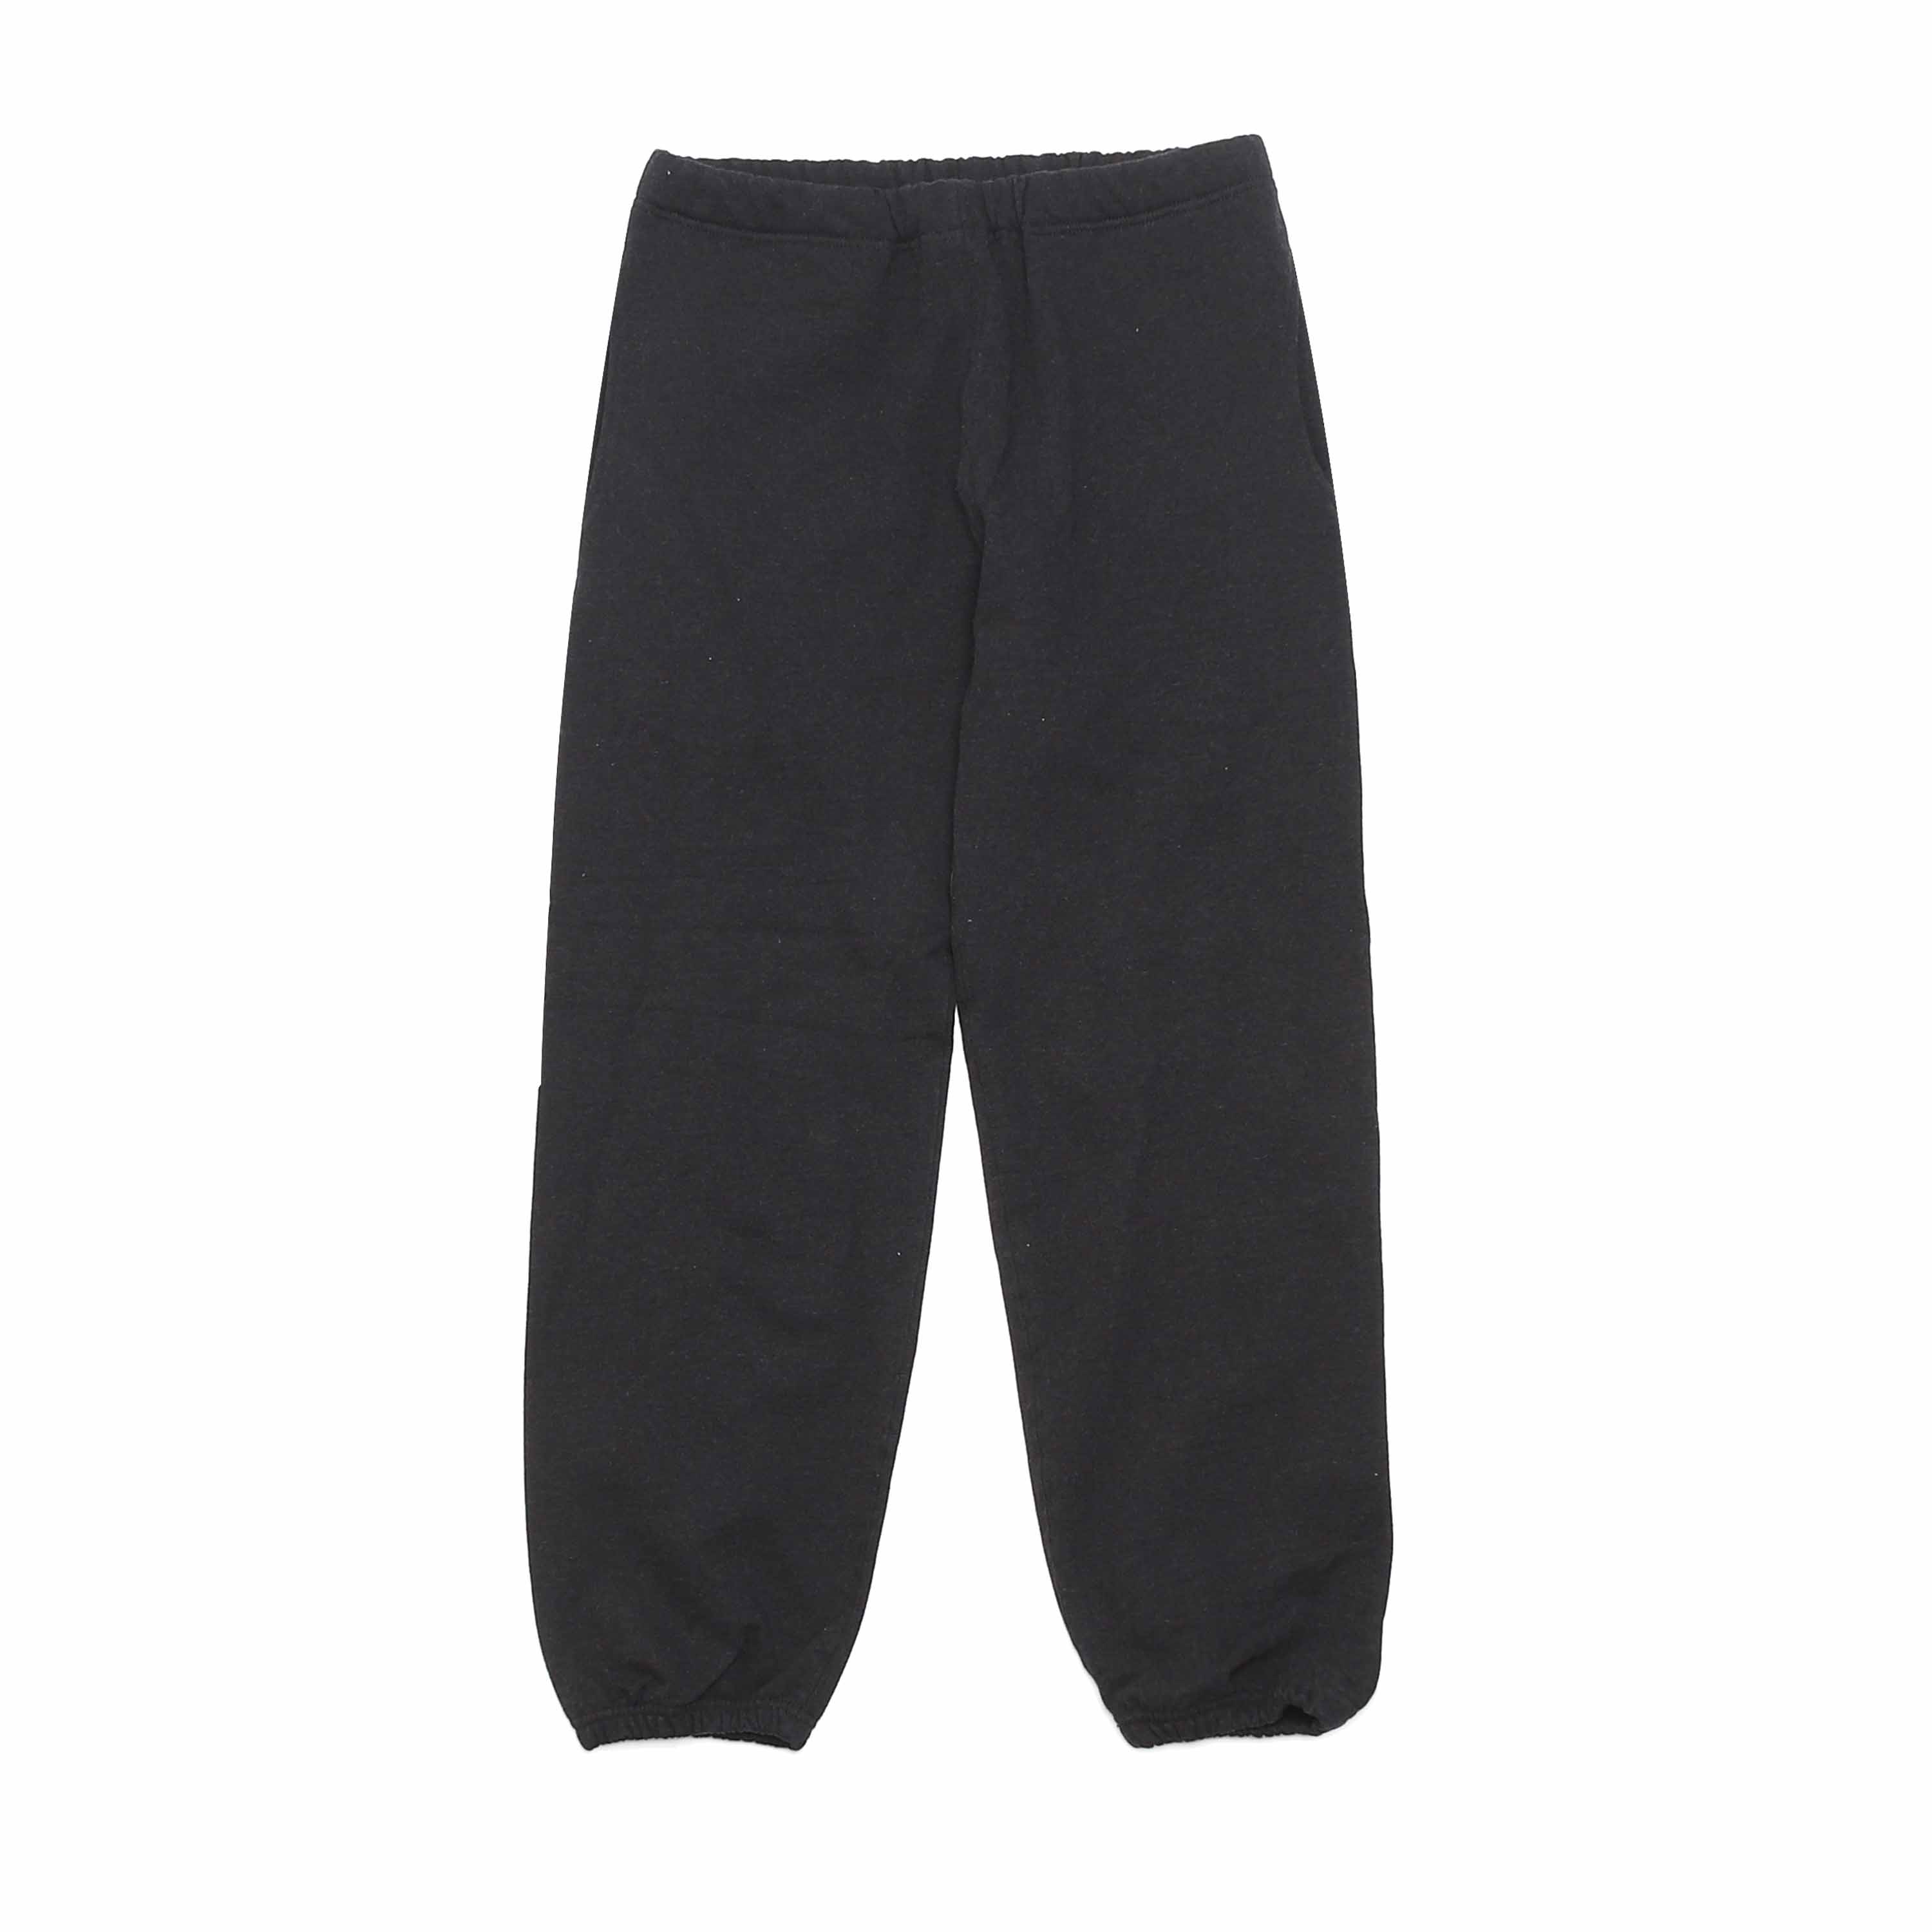 RECYCLED COTTON SWEAT PANTS - BLACK